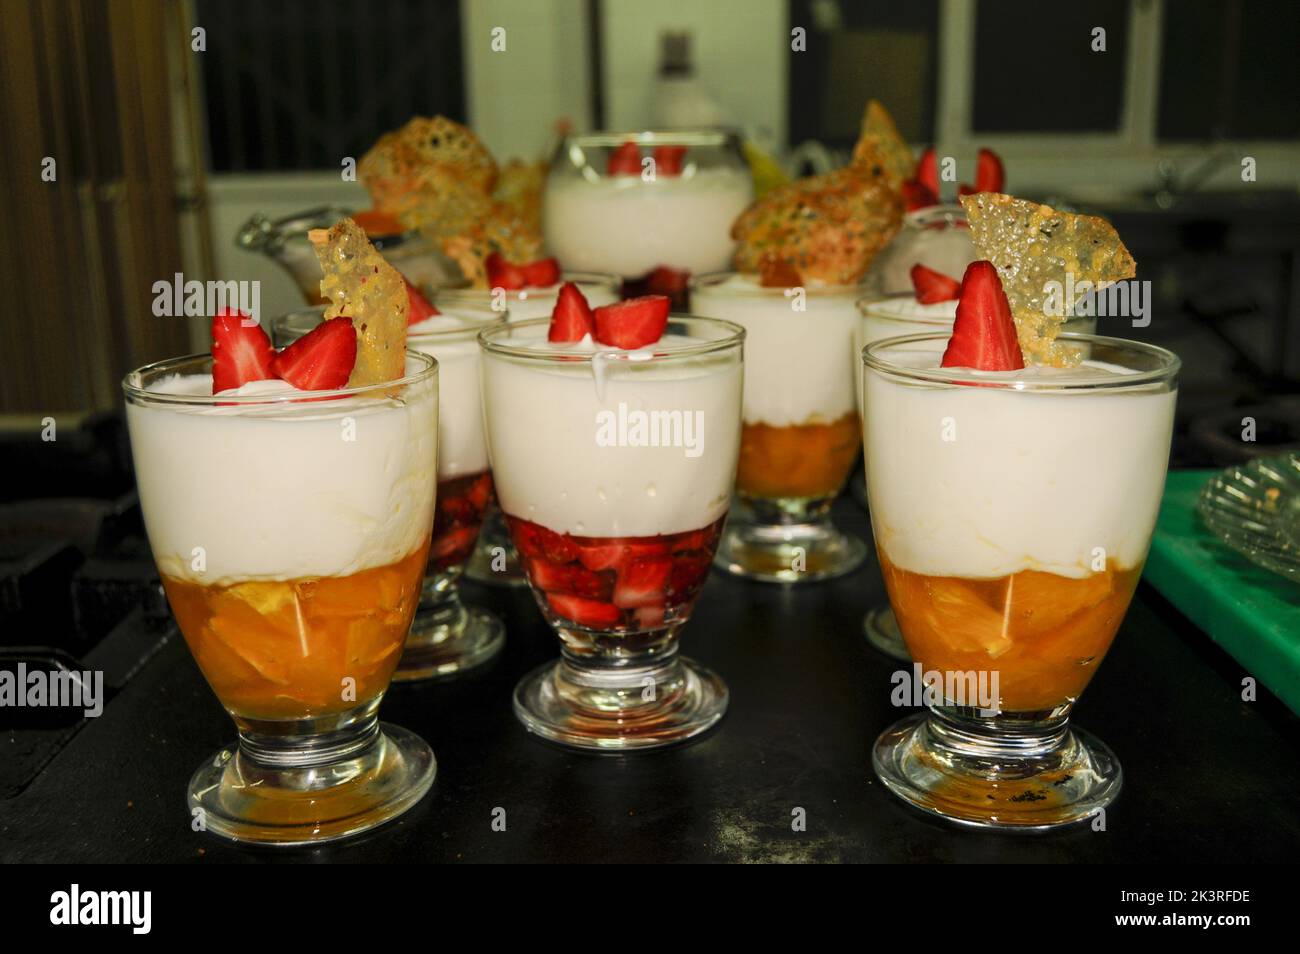 Yogurt and fruit mousse in glass cups Stock Photo